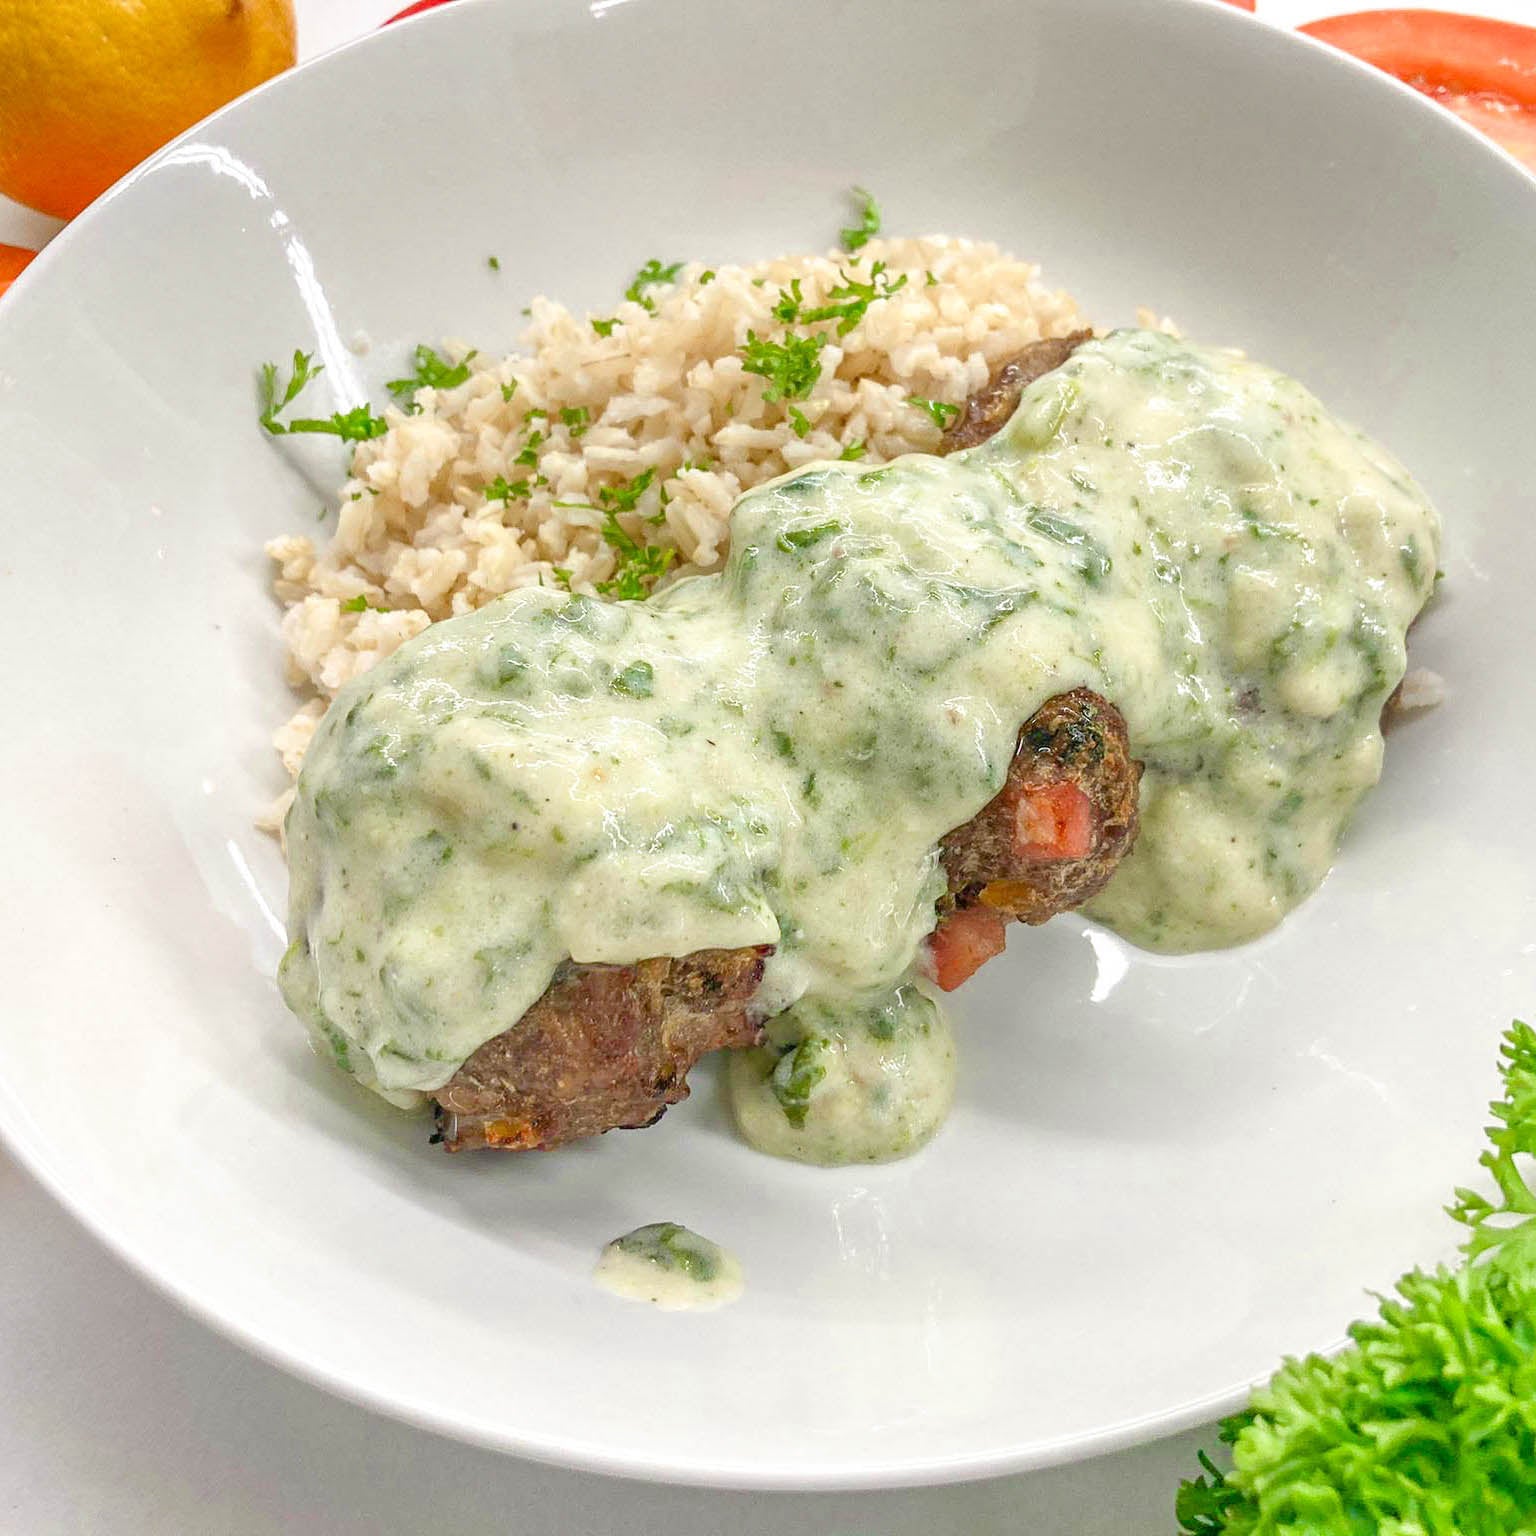 Beef burger with spinach sauce